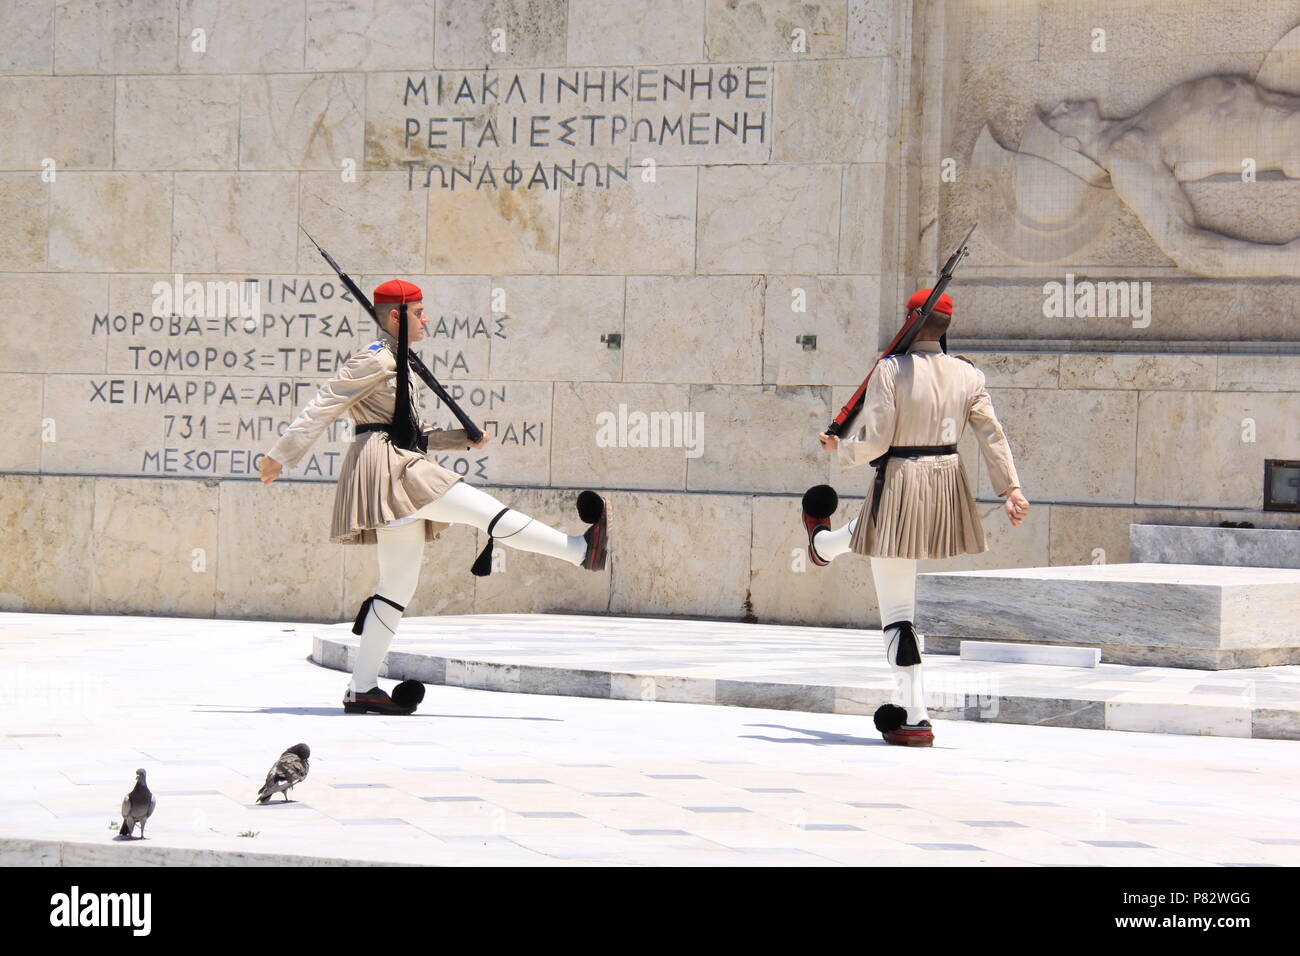 Changing of the ceremonial guard (elite Evzone soldiers) at the Presidential Mansion and the Tomb of the Unknown Soldier, Athens, GREECE, PETER GRANT Stock Photo